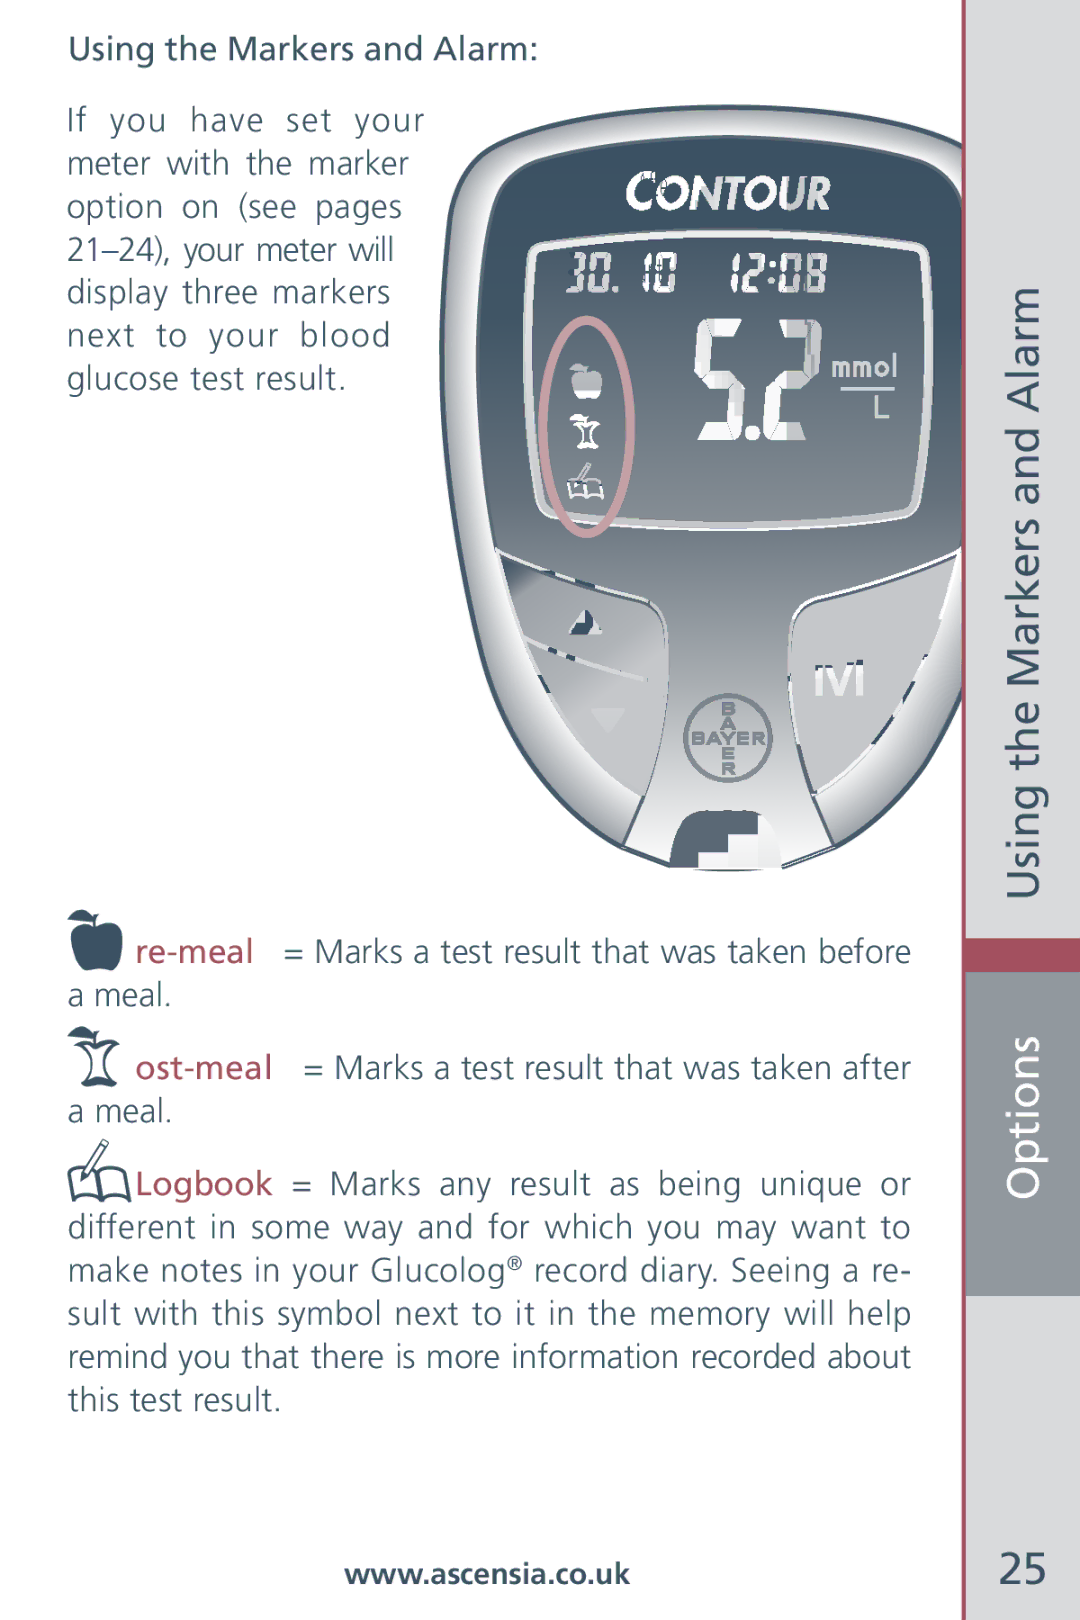 Bayer HealthCare Blood Glucose Meter manual Options Using the Markers and Alarm 